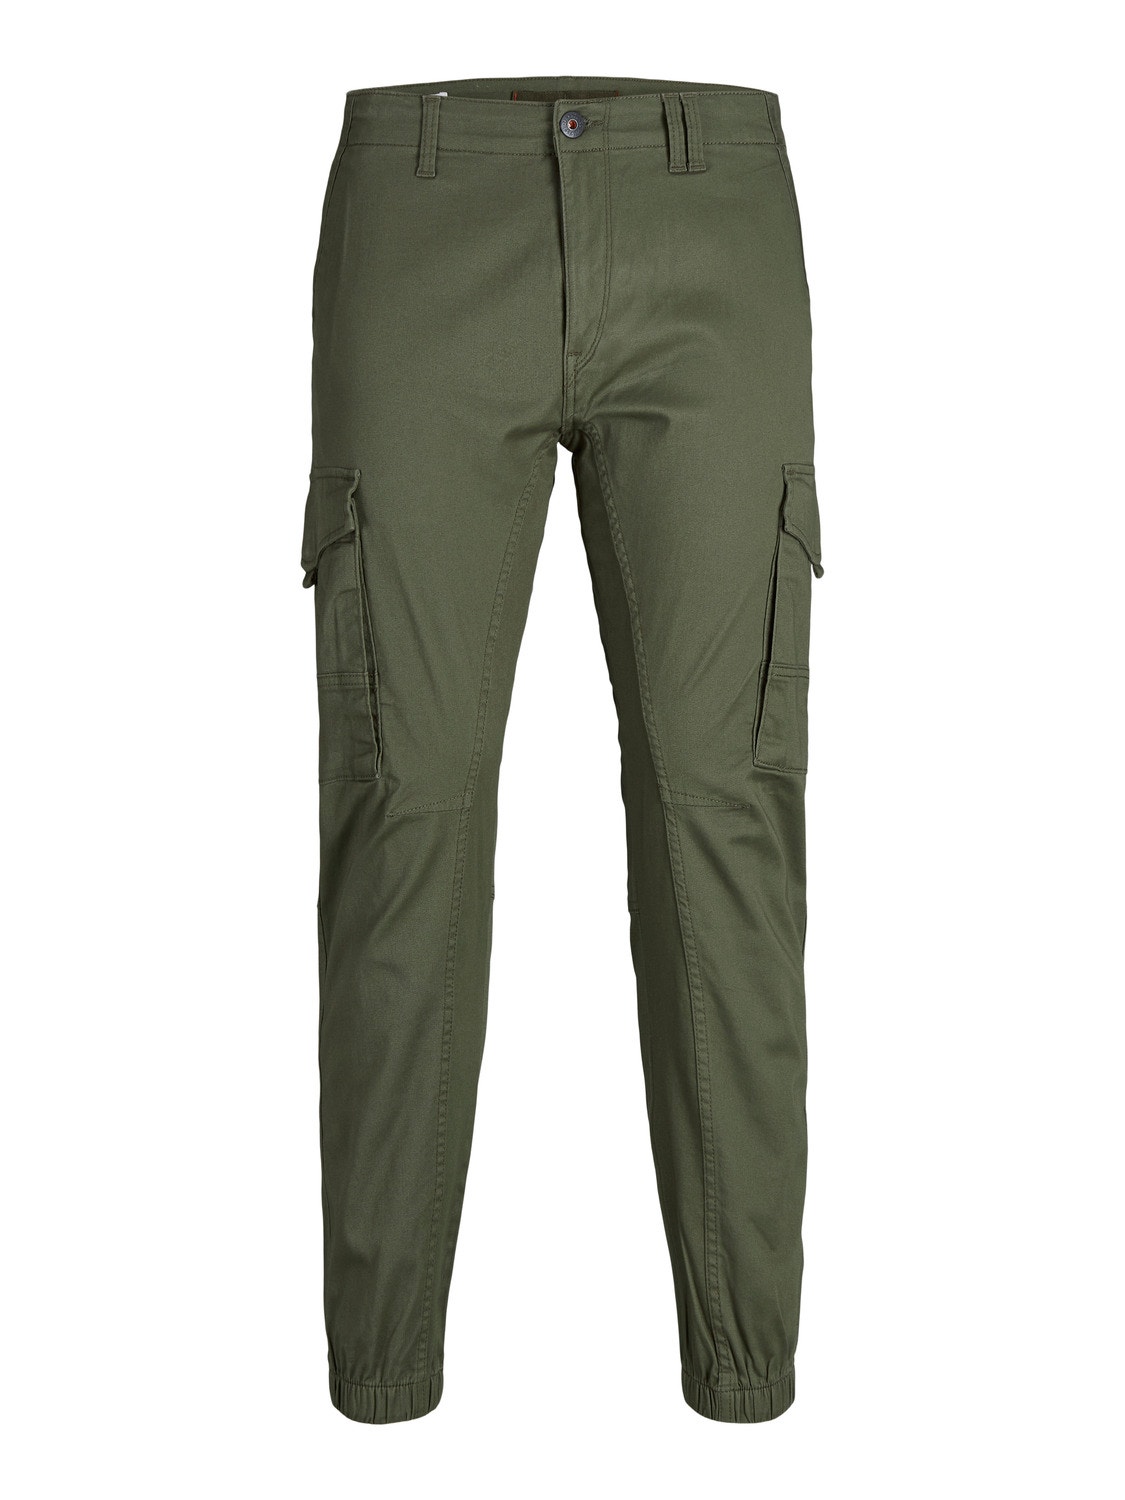 Jack & Jones Plus Size Slim Tapered Fit Cargo trousers -Olive Night - 12152279